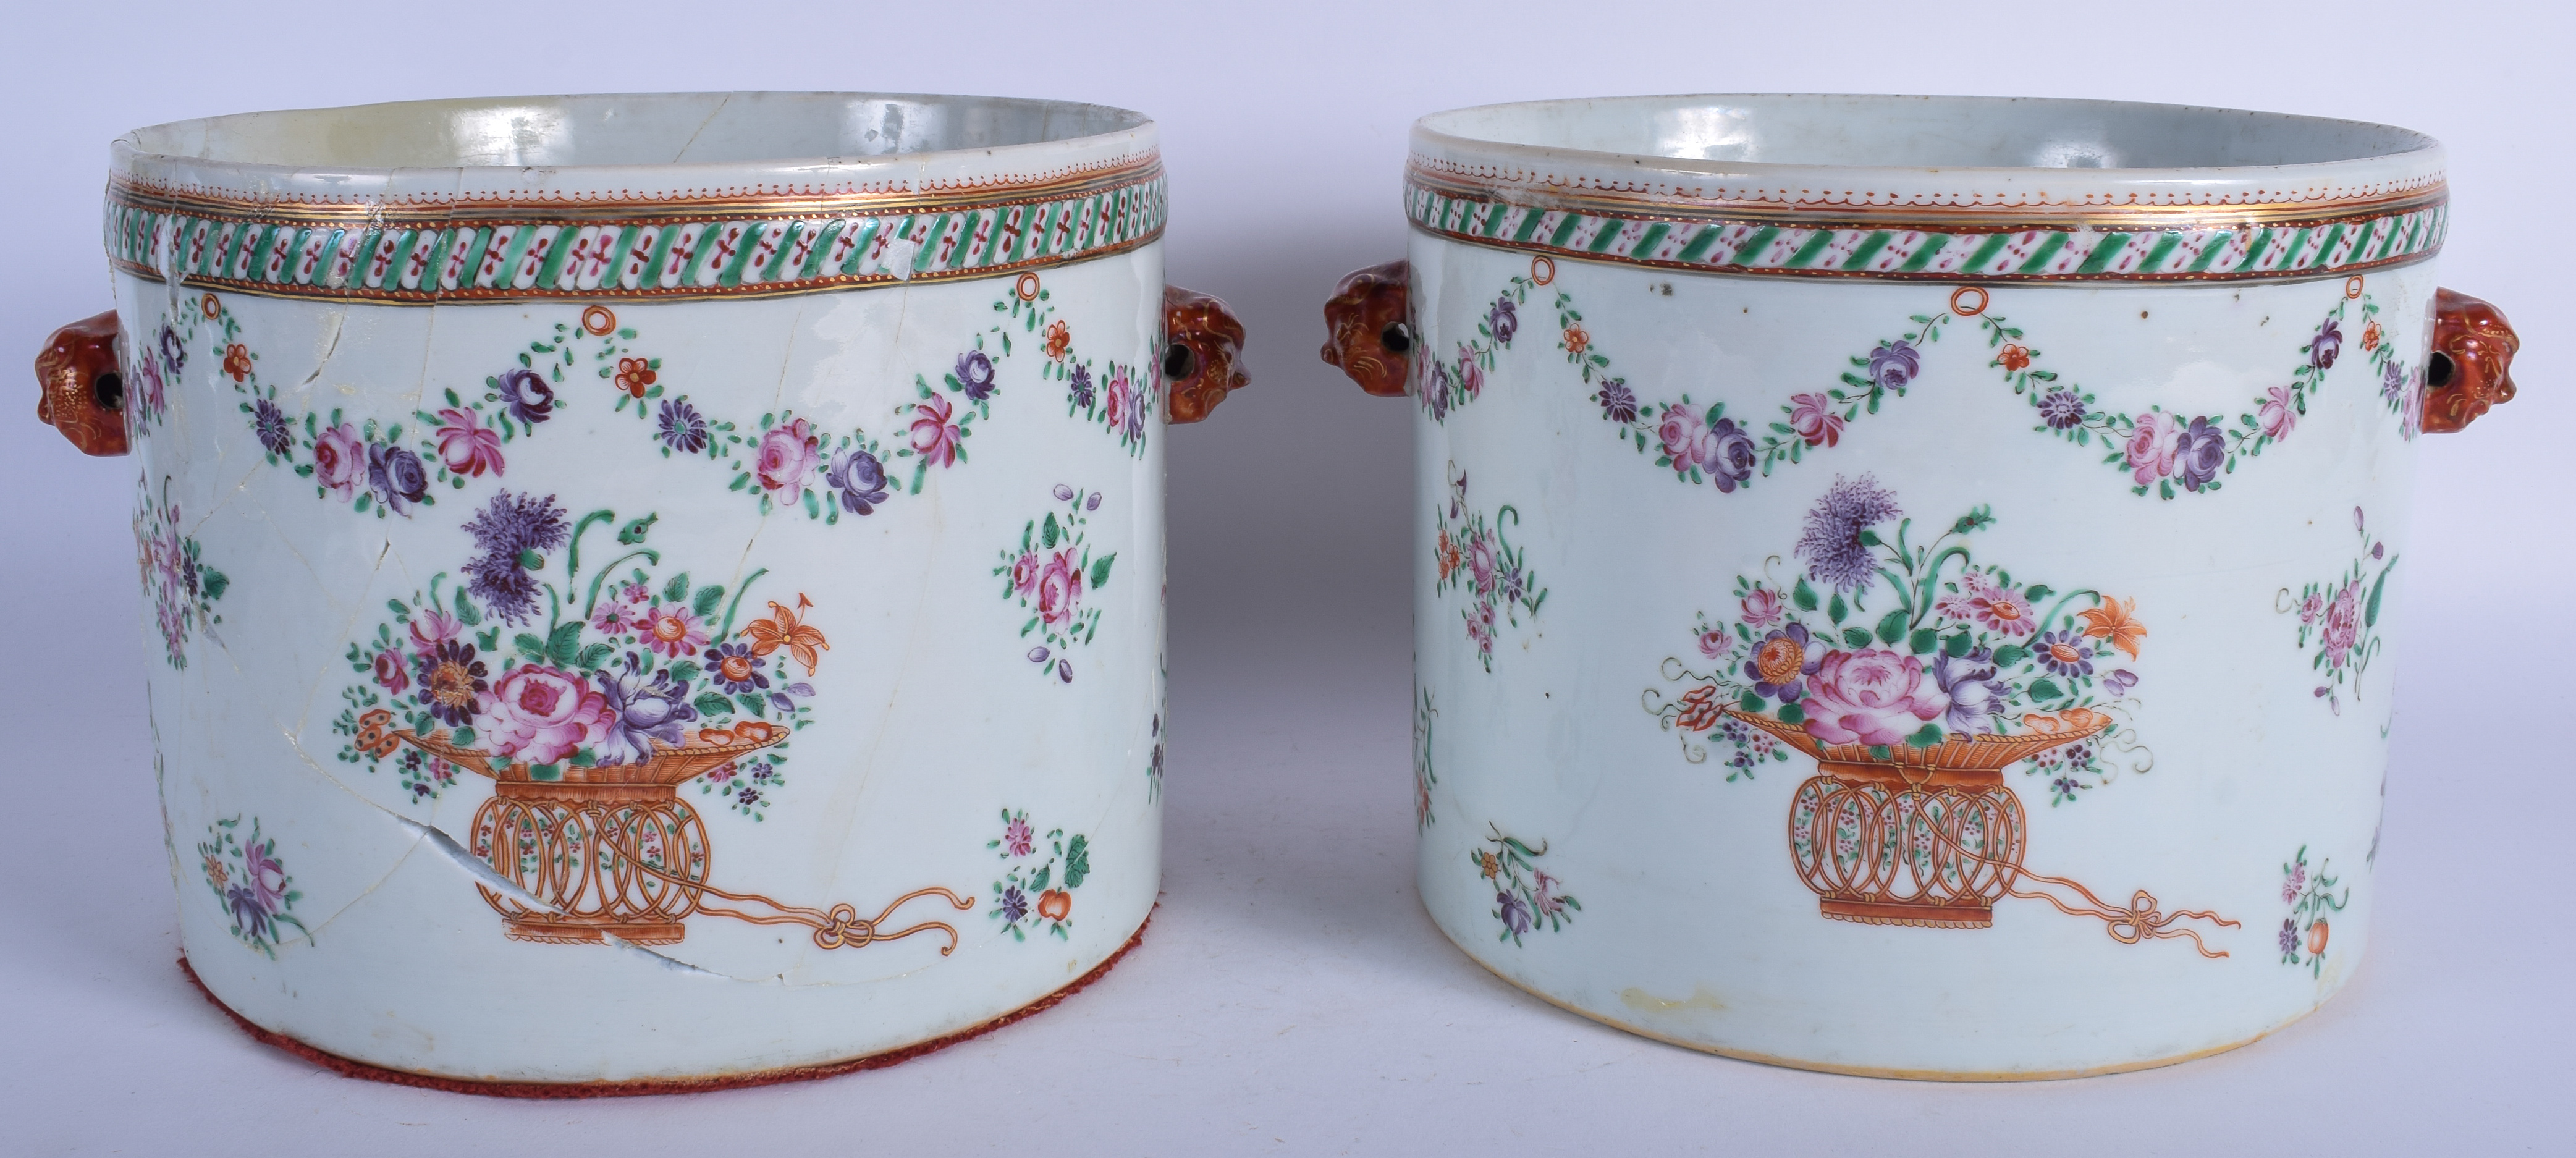 A LARGE PAIR OF 18TH CENTURY CHINESE EXPORT FAMILLE ROSE WINE COOLERS Qianlong. 17 cm x 17 cm. - Image 2 of 4